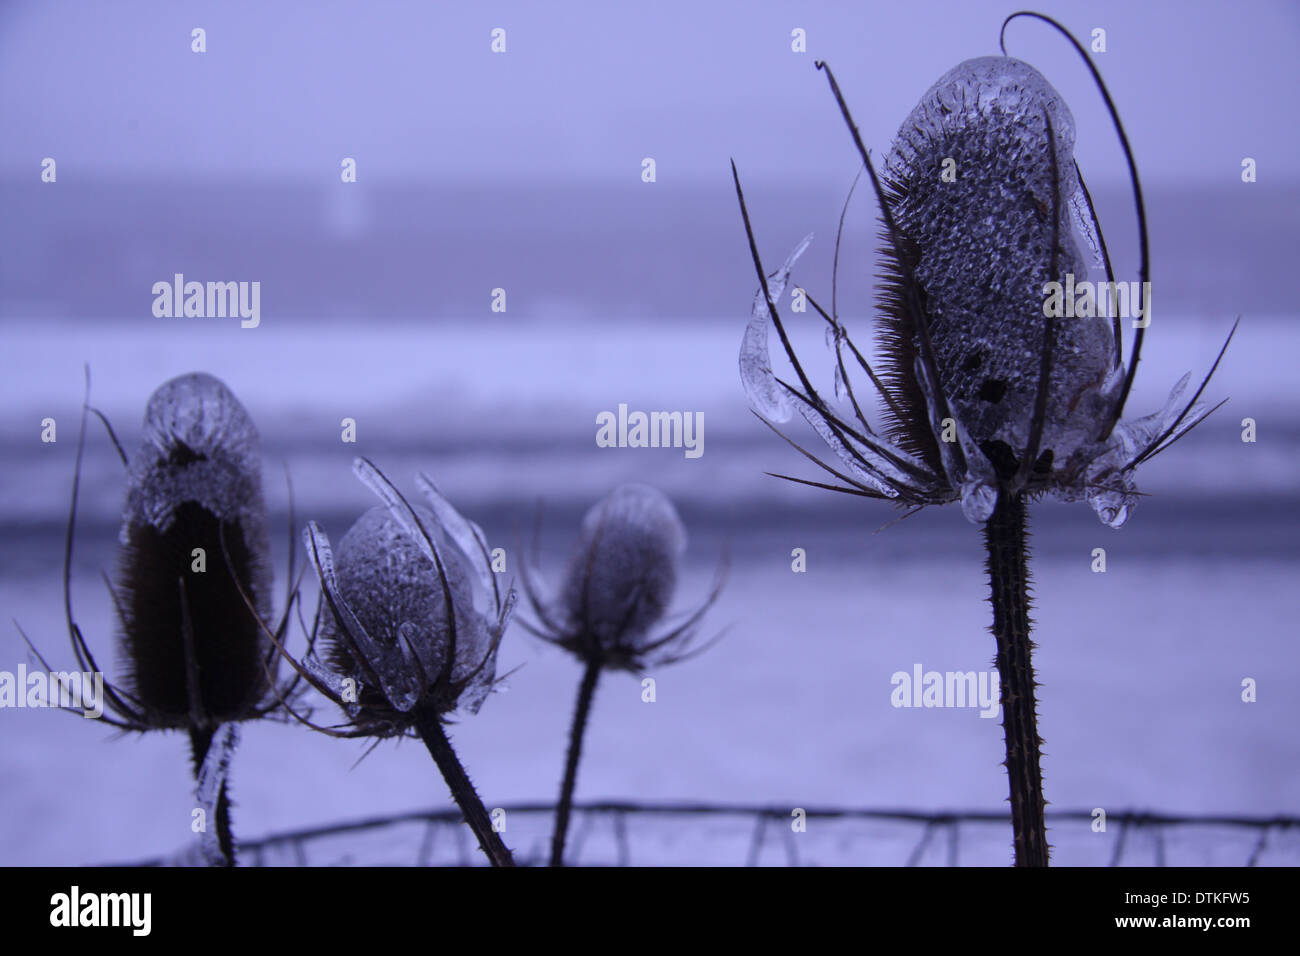 Frozen teasel blooms along the edge of the train tracks, caught in a freak deep freeze Stock Photo